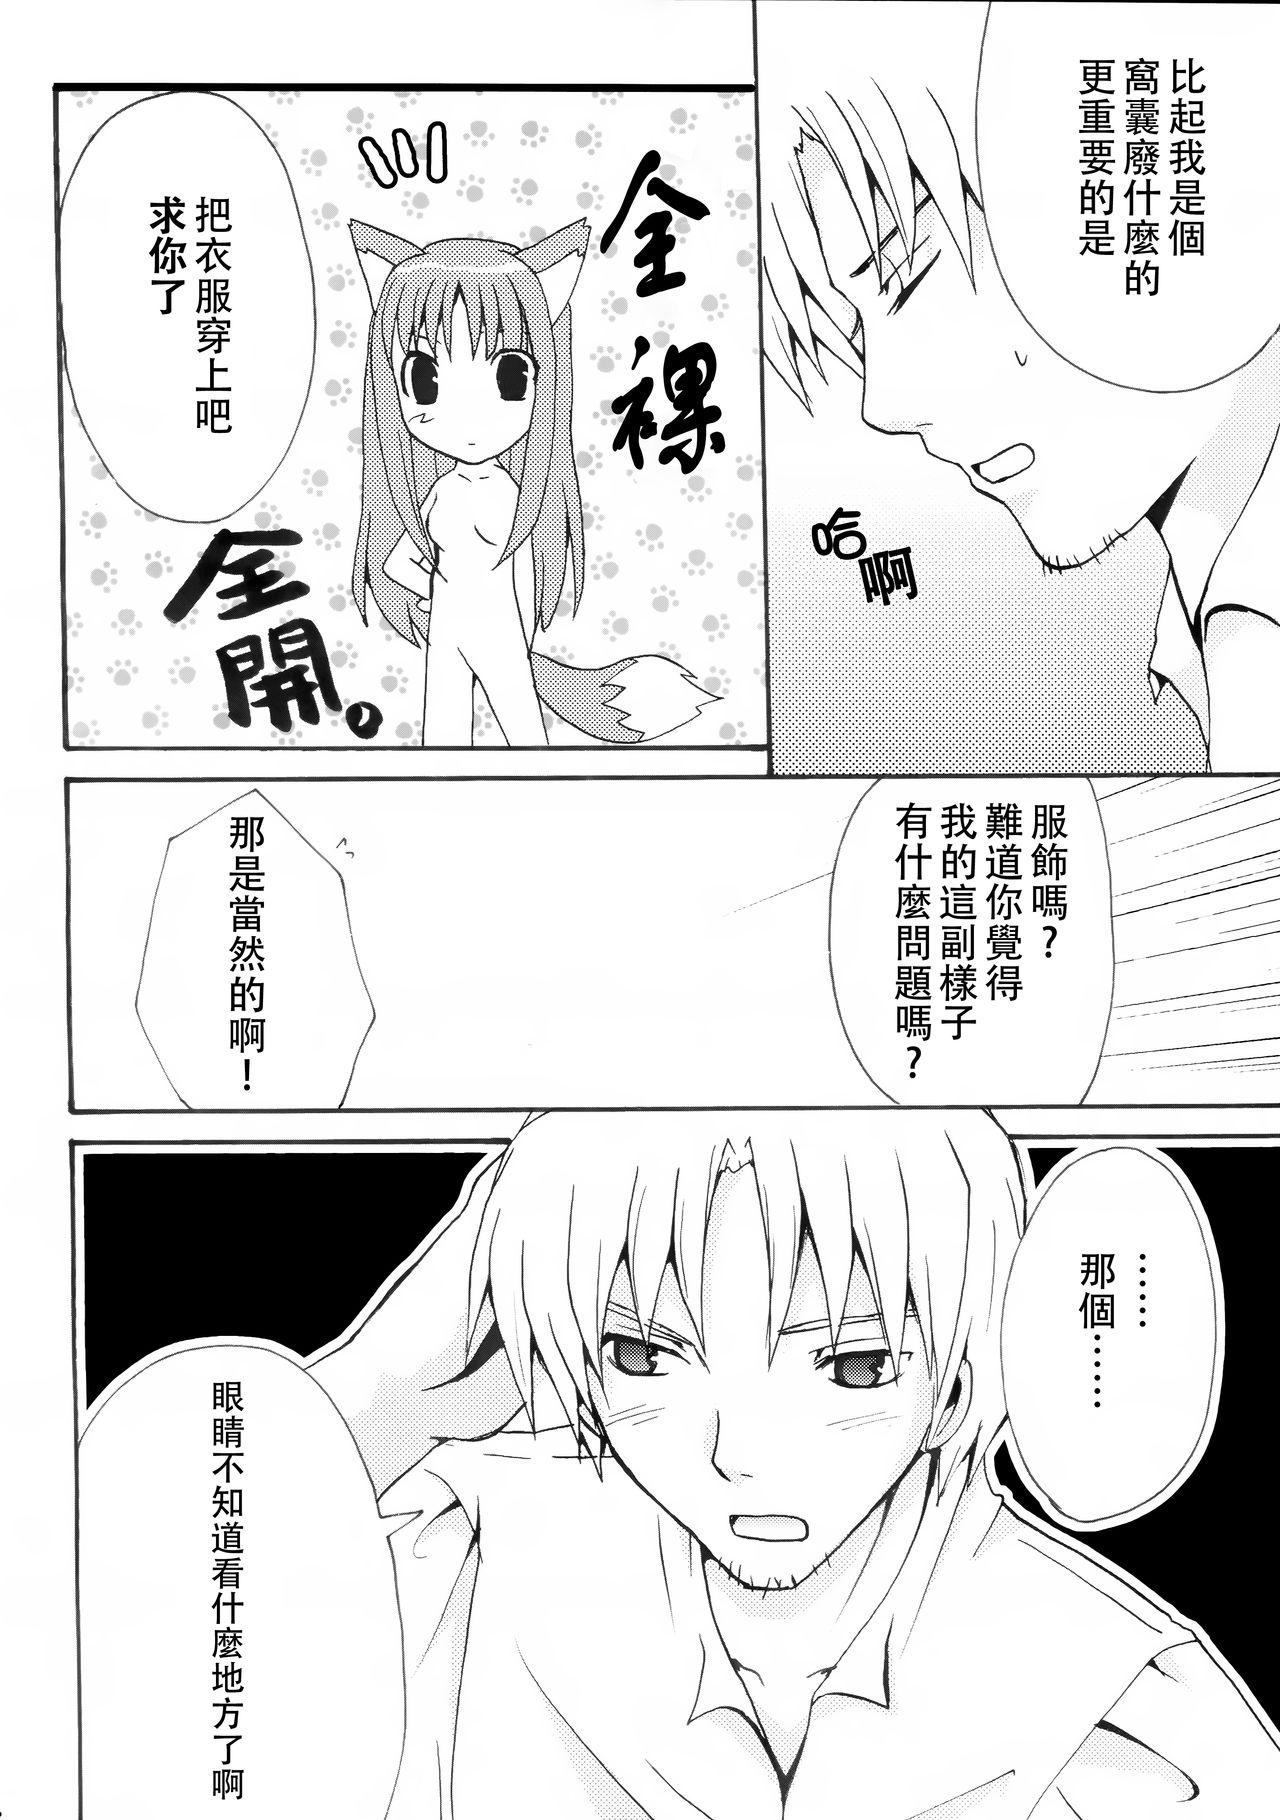 Blond Rosemary - Spice and wolf Free Amateur - Page 6